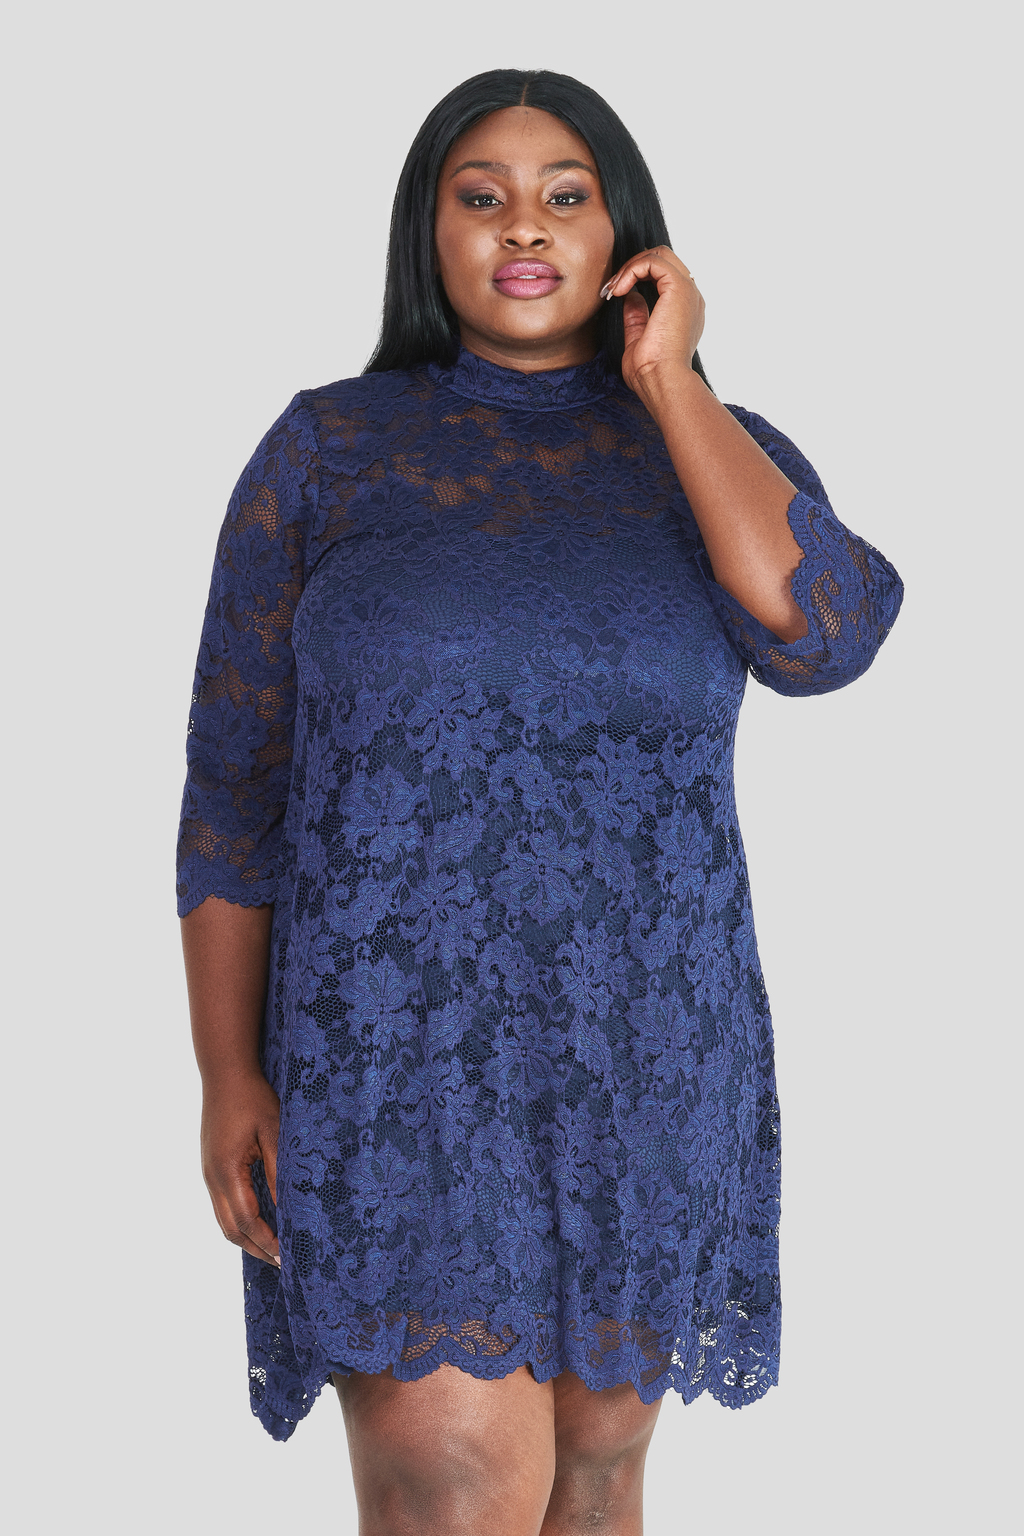 Lace high neck plus size clothing - Fashion Book